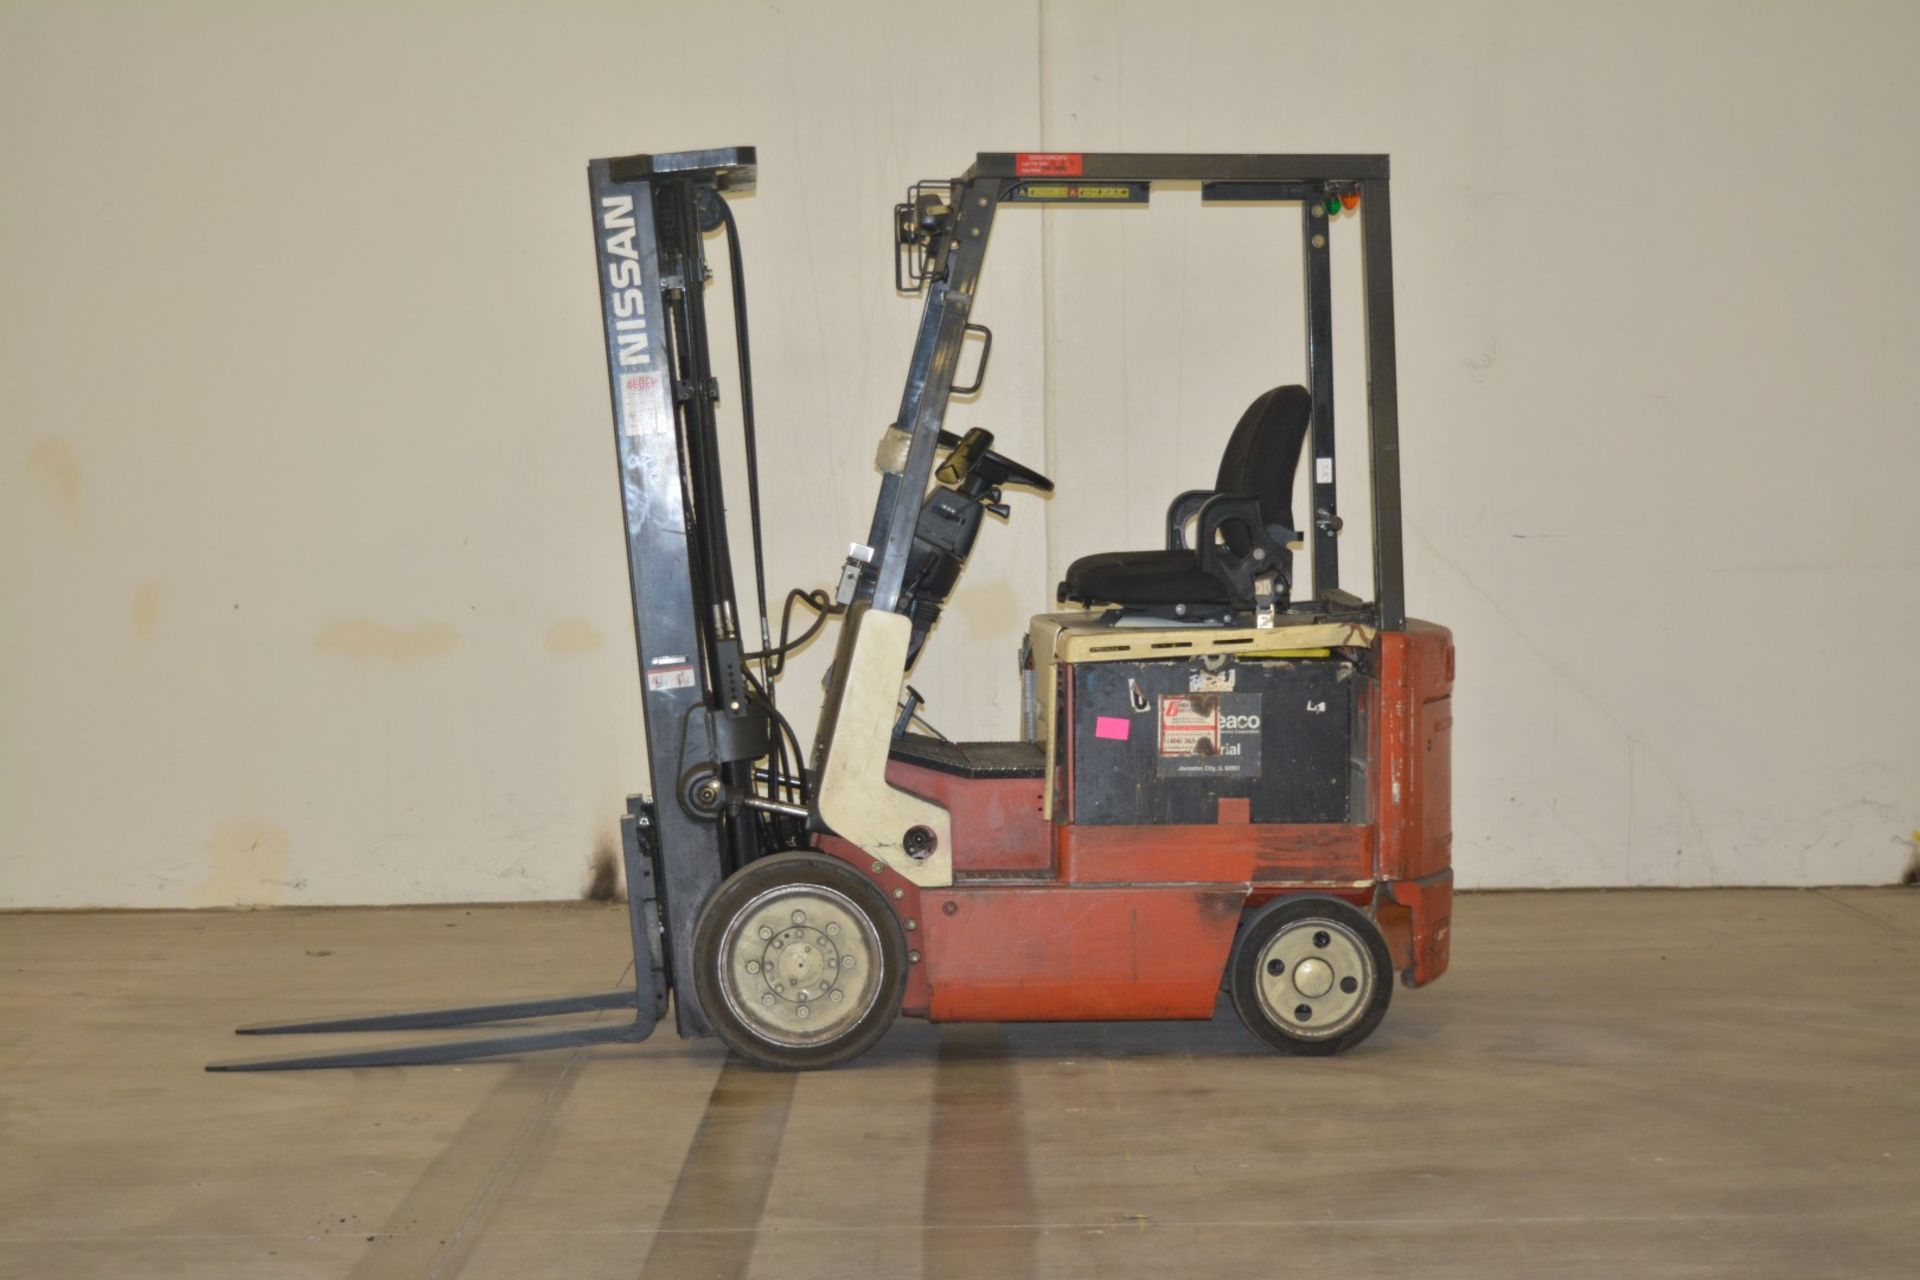 2005 NISSAN 4000 LBS CAPACITY ELECTRIC FORKLIFT, 2014 BATTERY, (WATCH VIDEO)